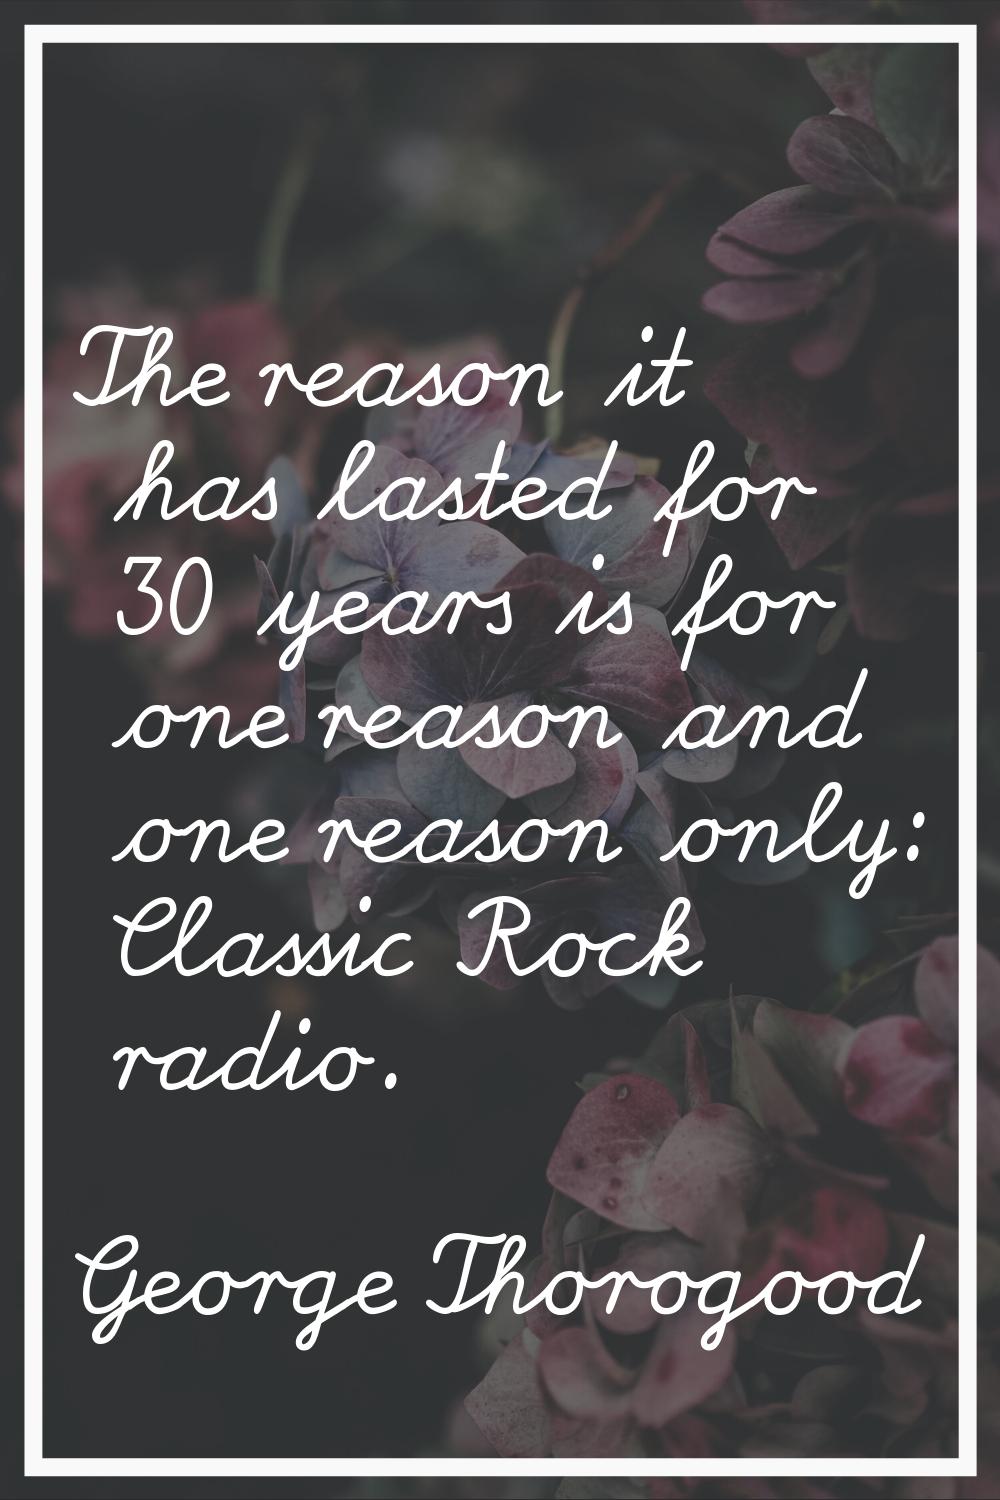 The reason it has lasted for 30 years is for one reason and one reason only: Classic Rock radio.